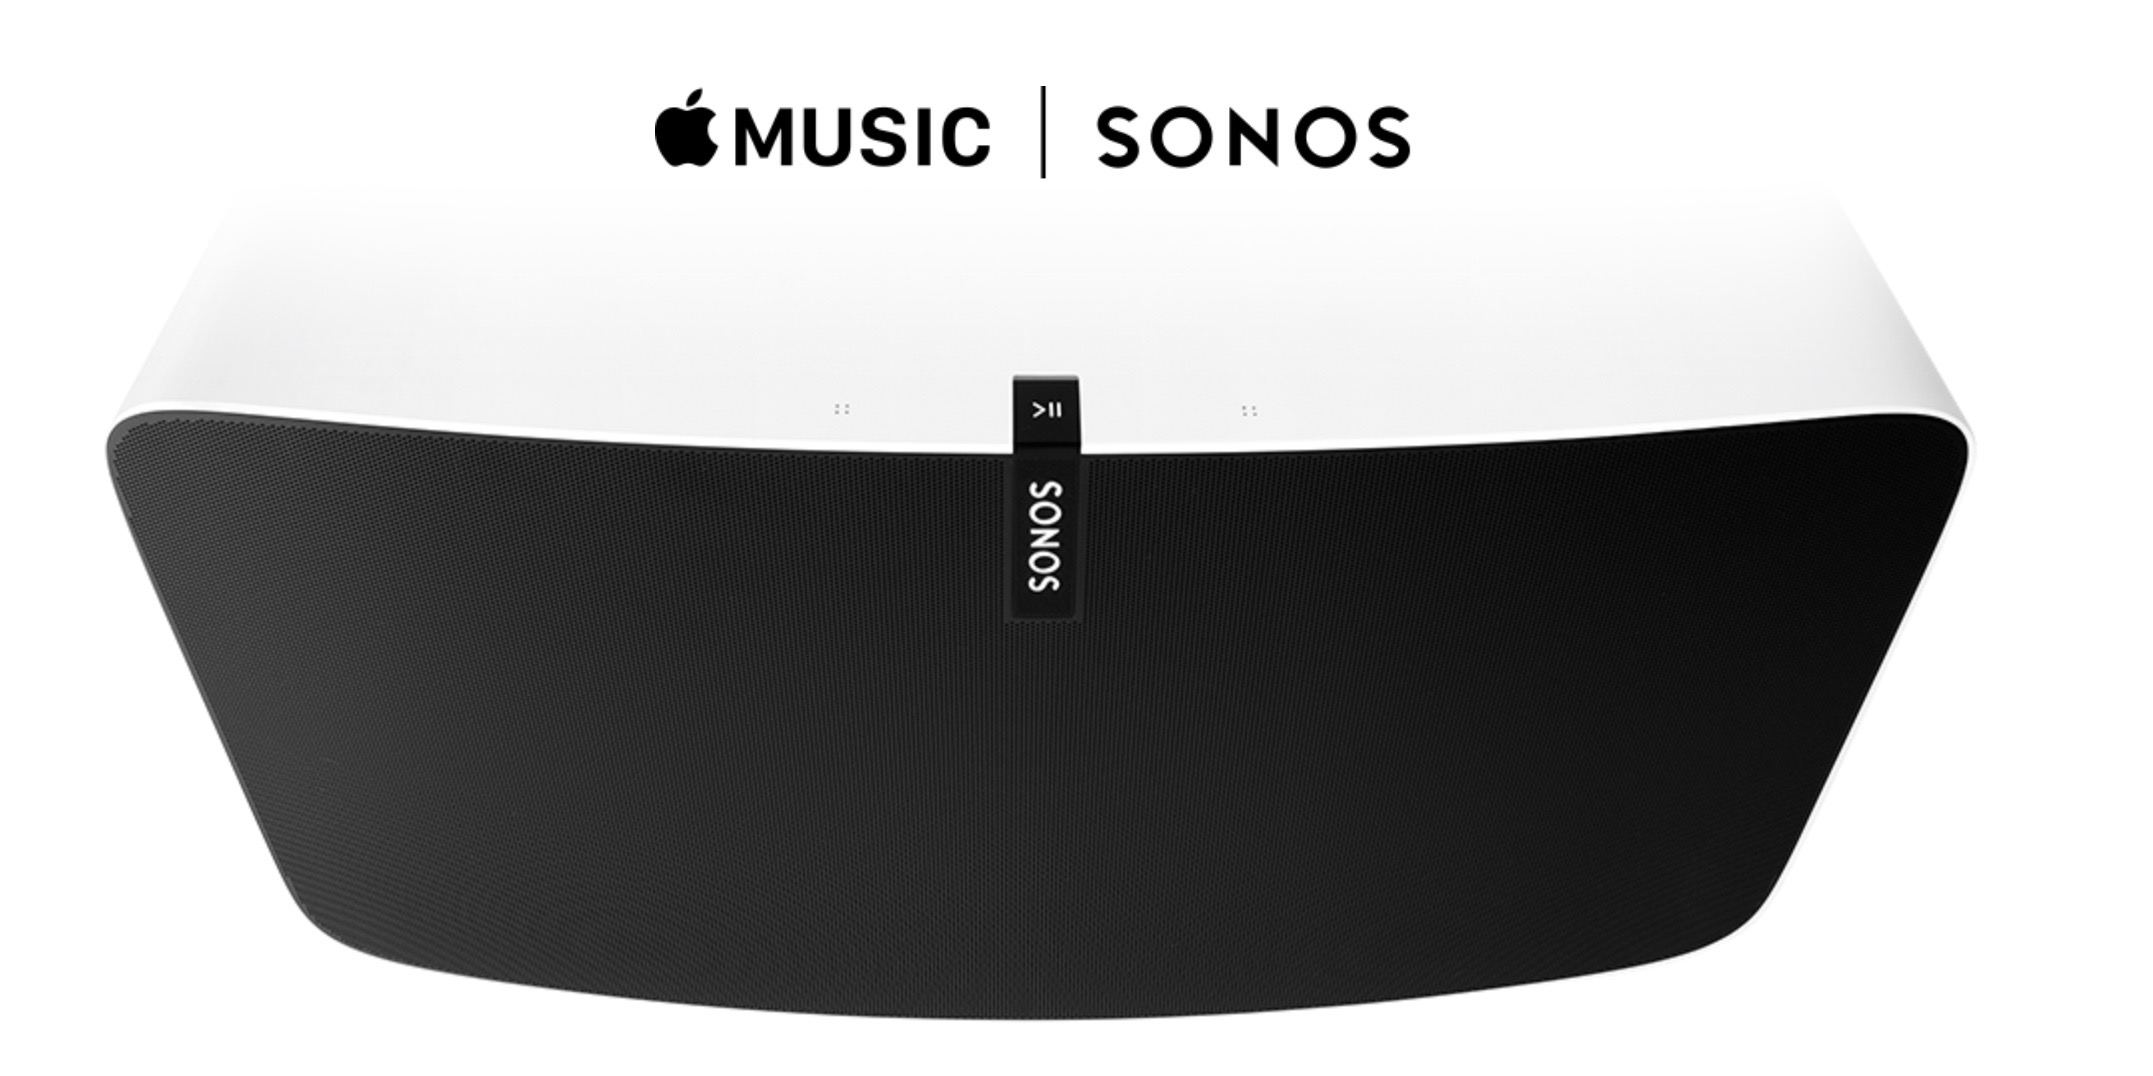 Skibform Omsorg gyde Sonos rolling out Apple Music support in beta from today - 9to5Mac